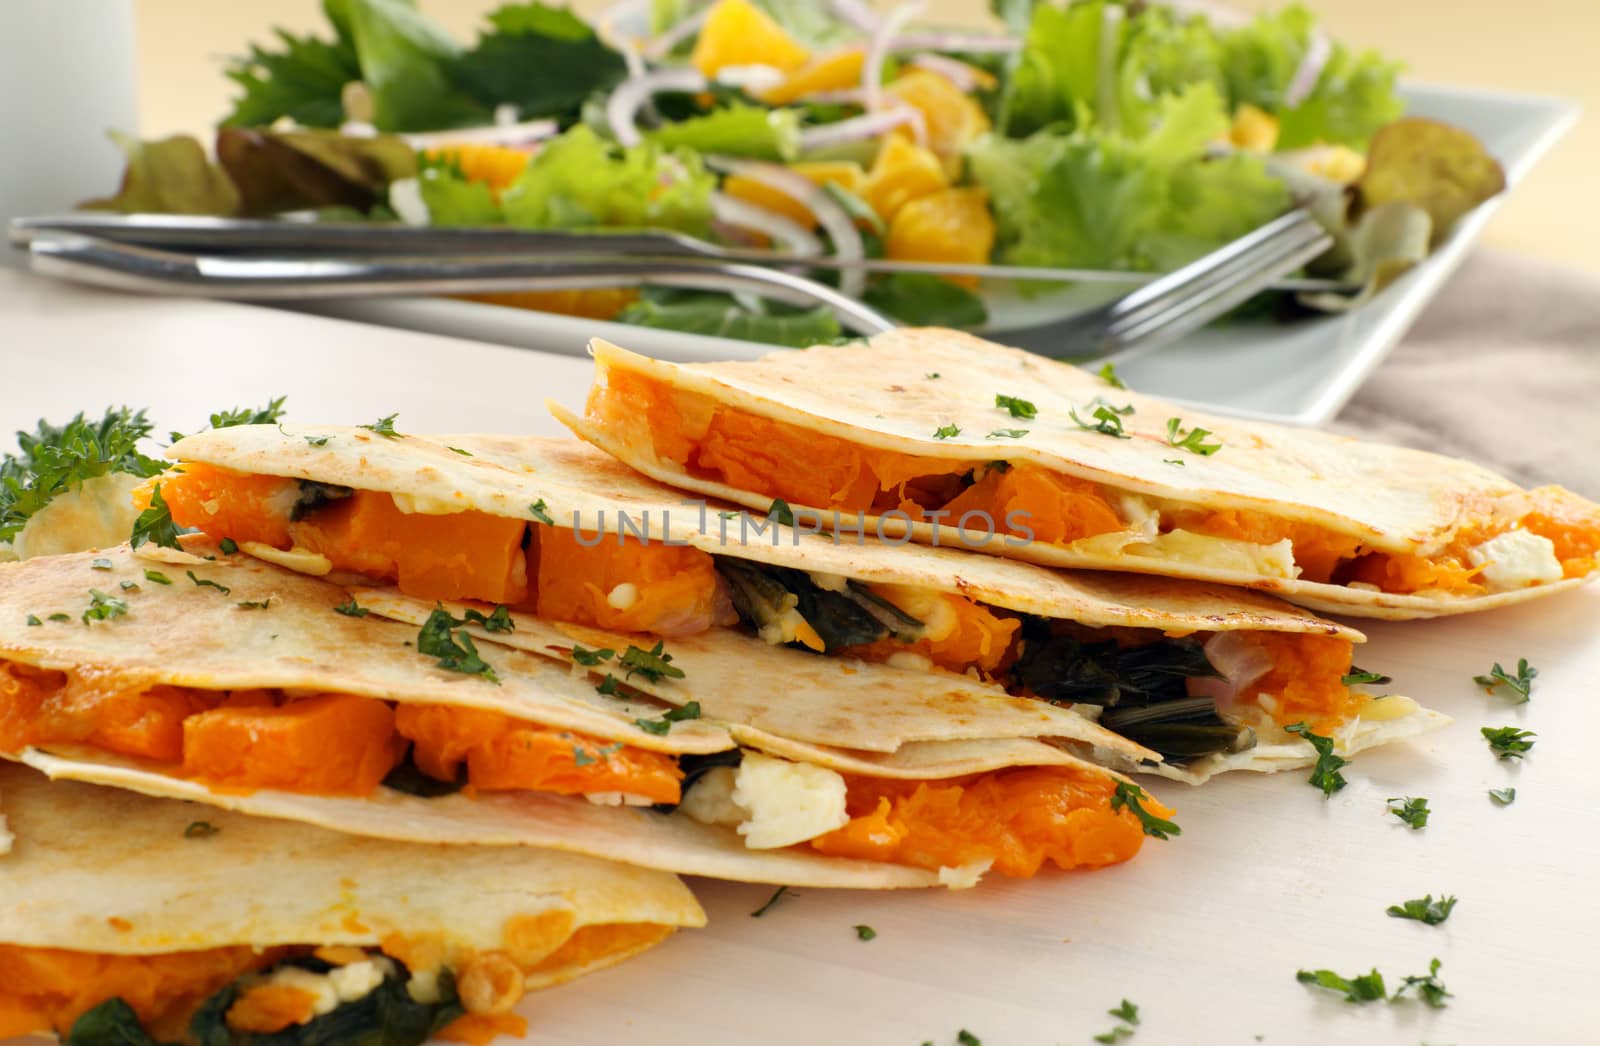 Delicious pumpkin quesadilla sliced and ready to serve with a garden salad.